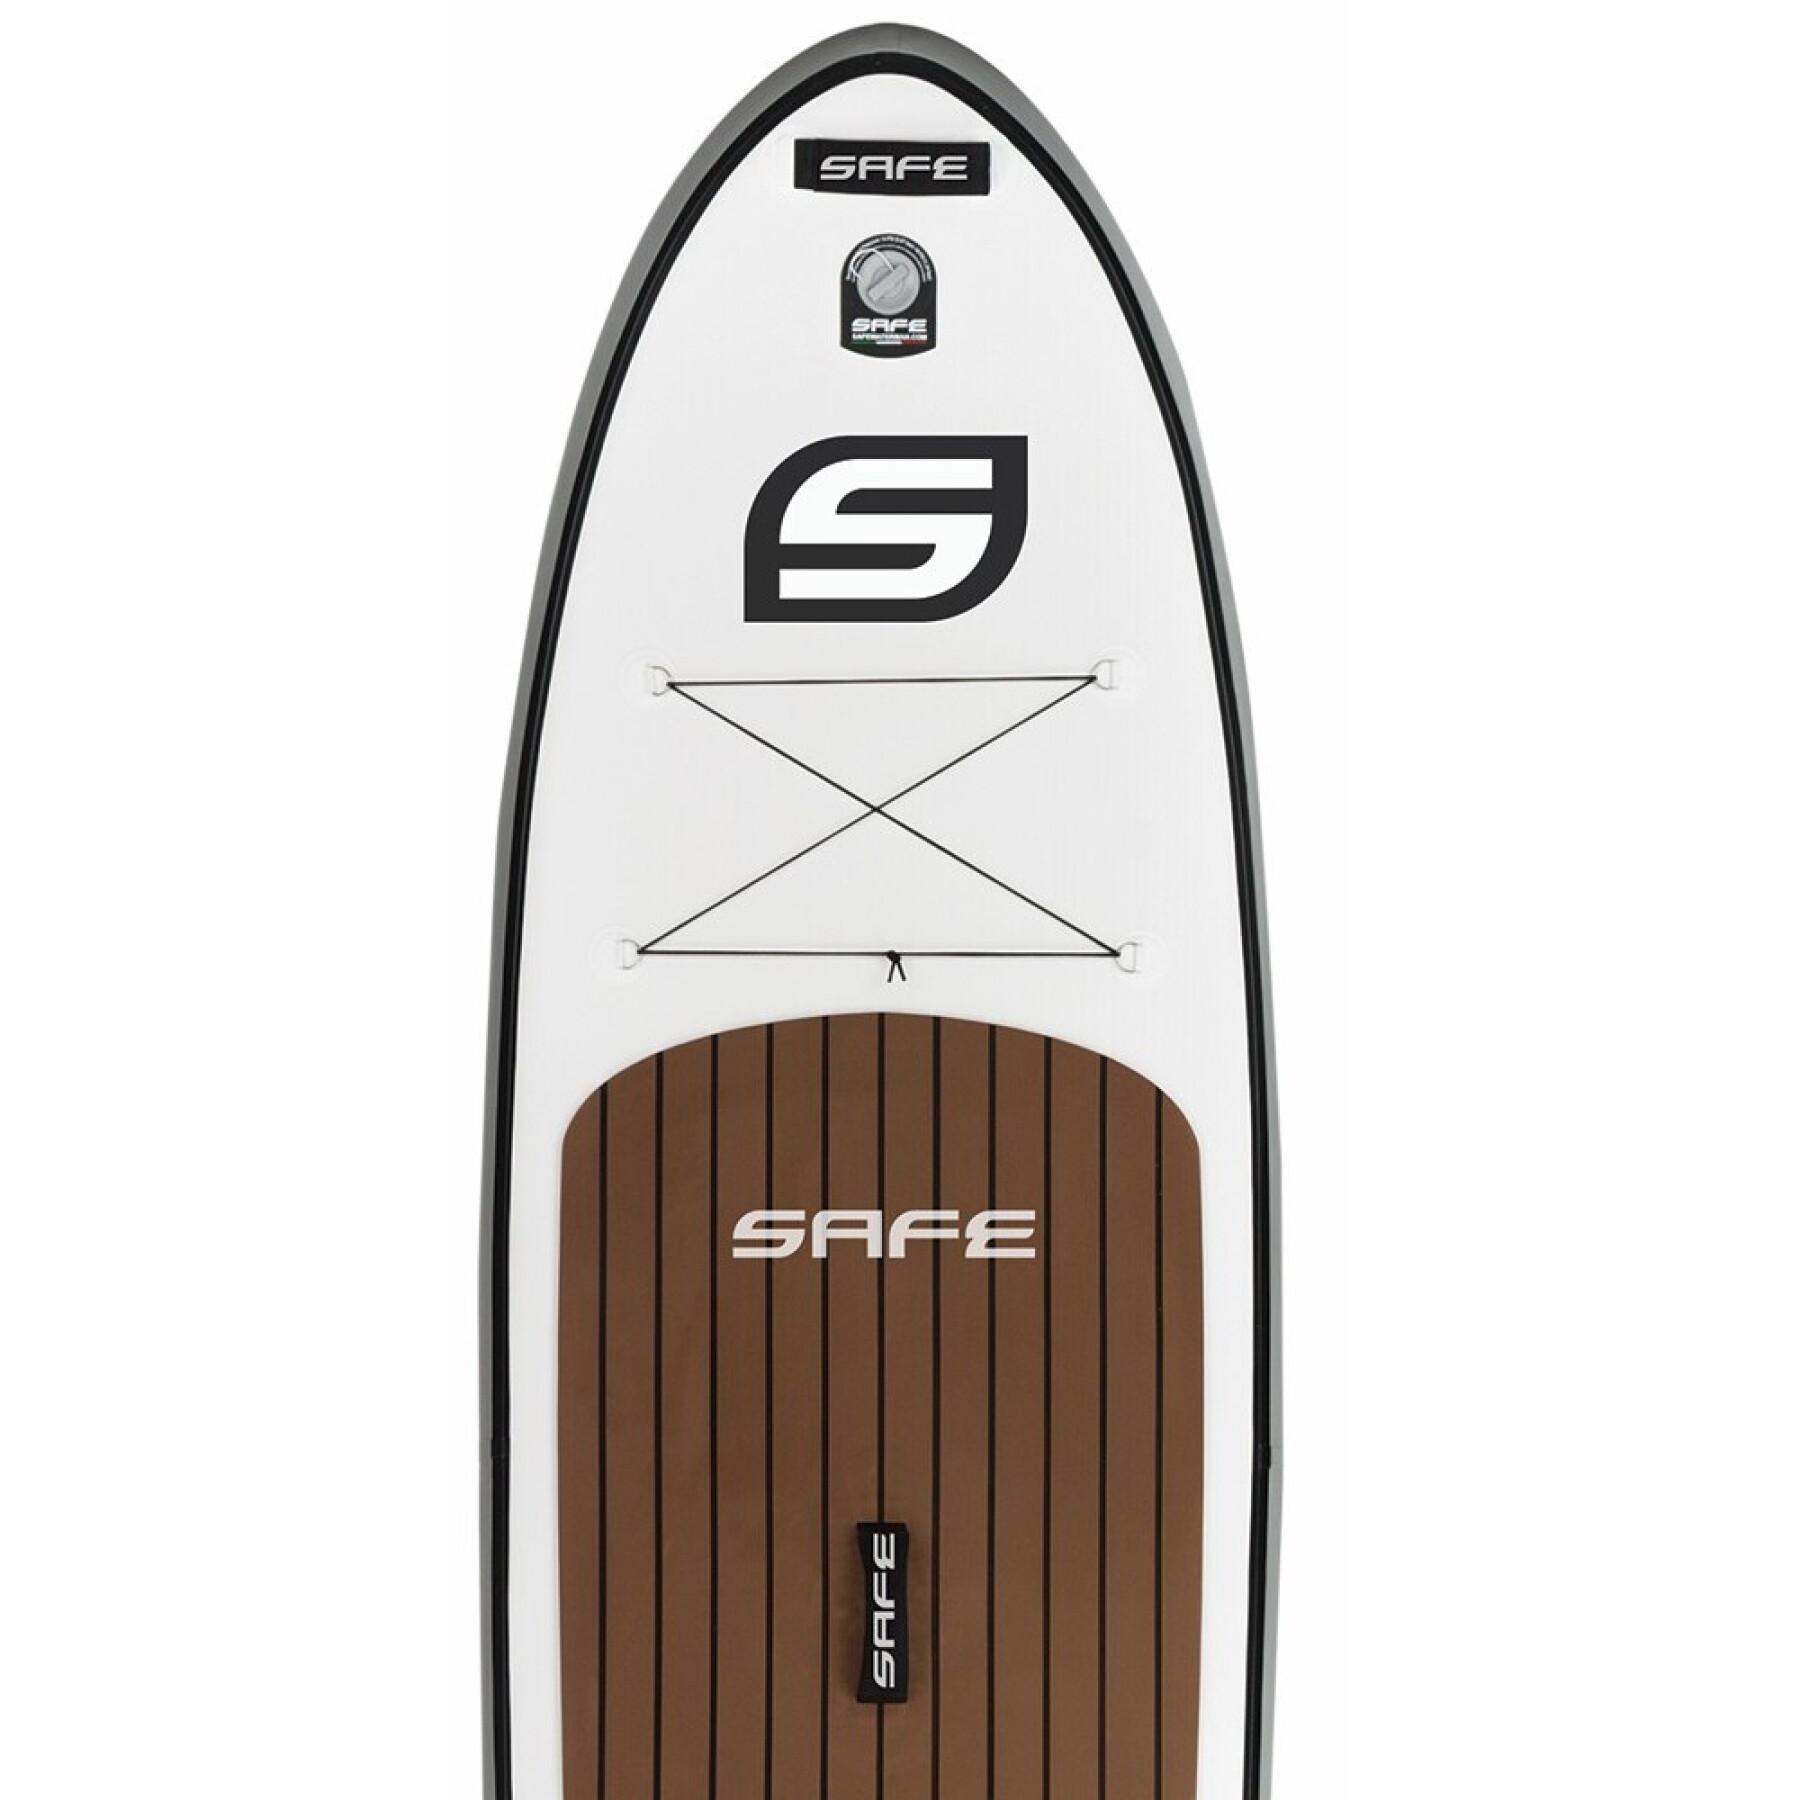 Stand up gonfiabile Safe Waterman Nautic All round – 10’6